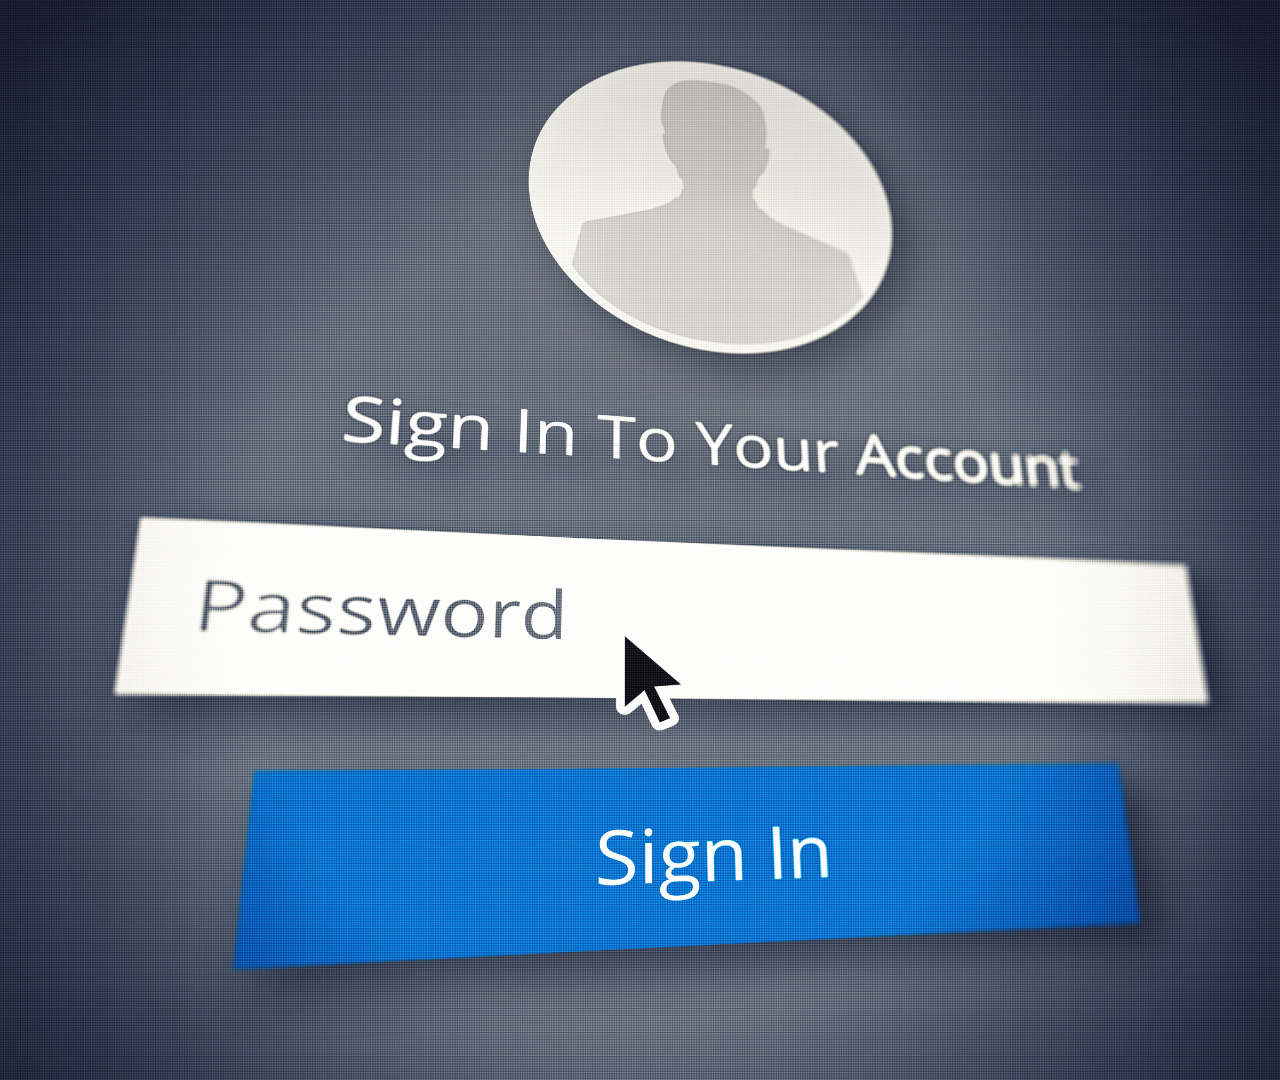 Password entry section and sign in page